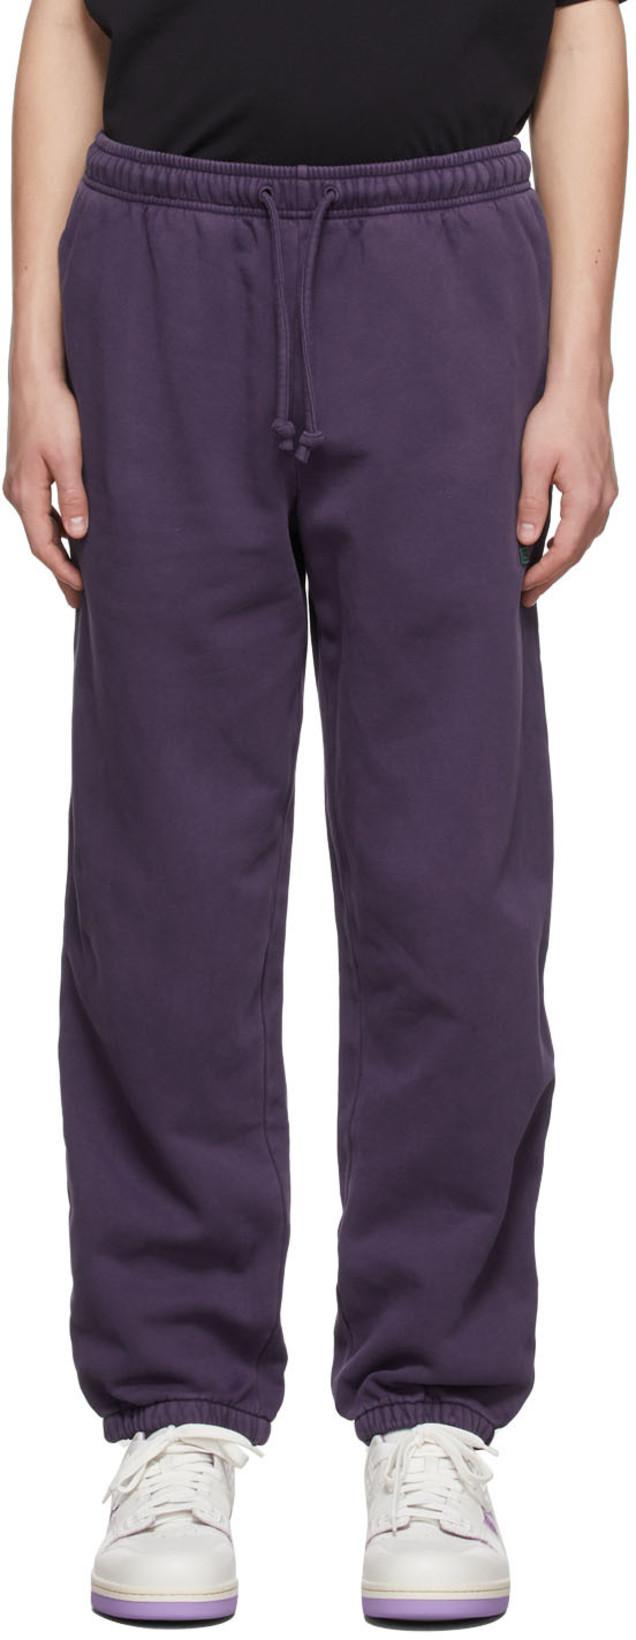 Purple Tapered Trousers by SITUATIONIST | jellibeans